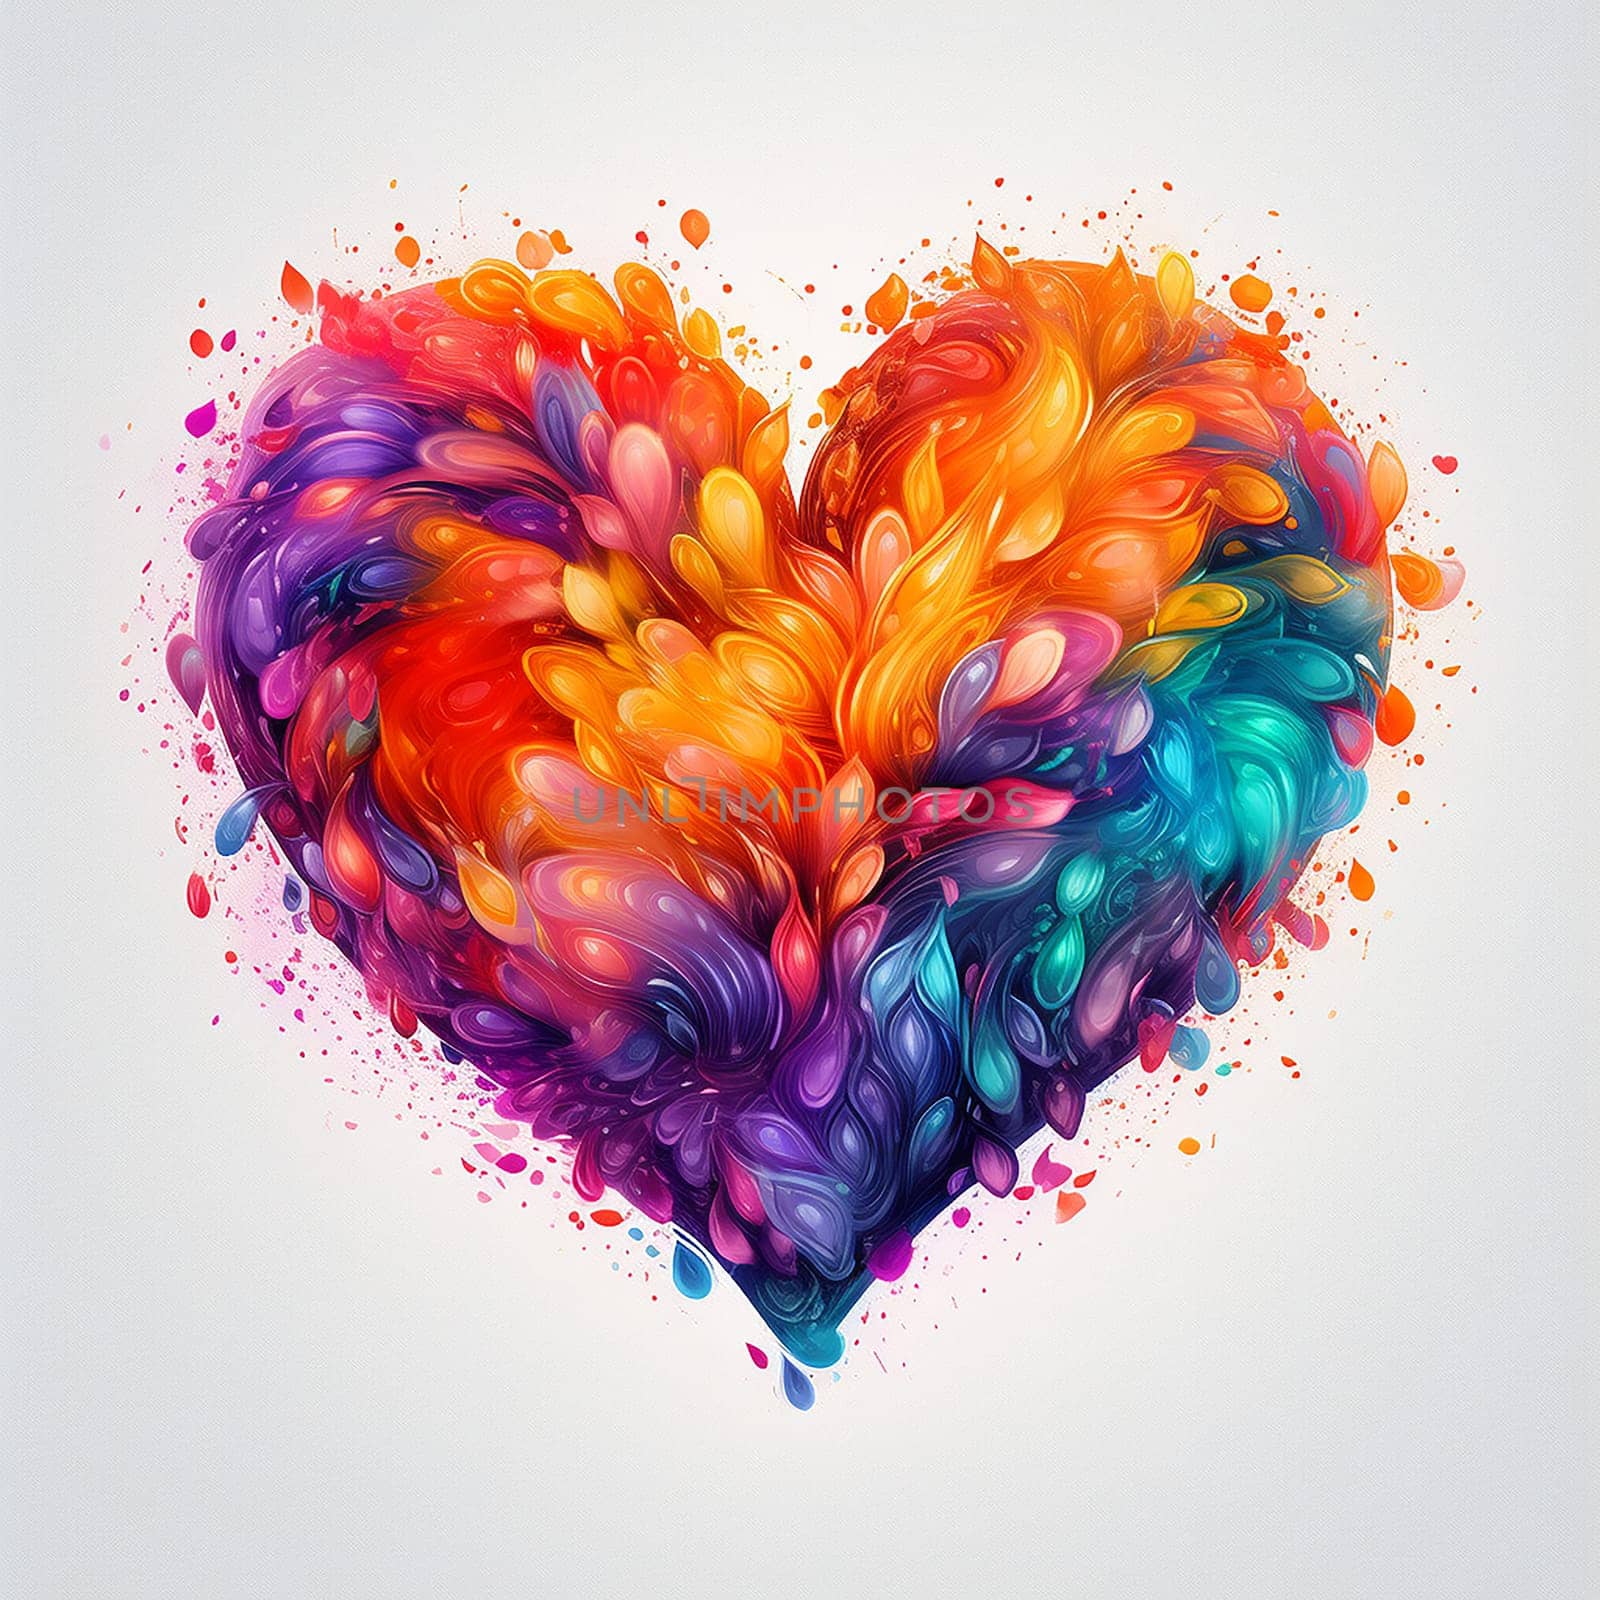 Colorful heart illustration with vibrant swirls representing love or emotion by Hype2art